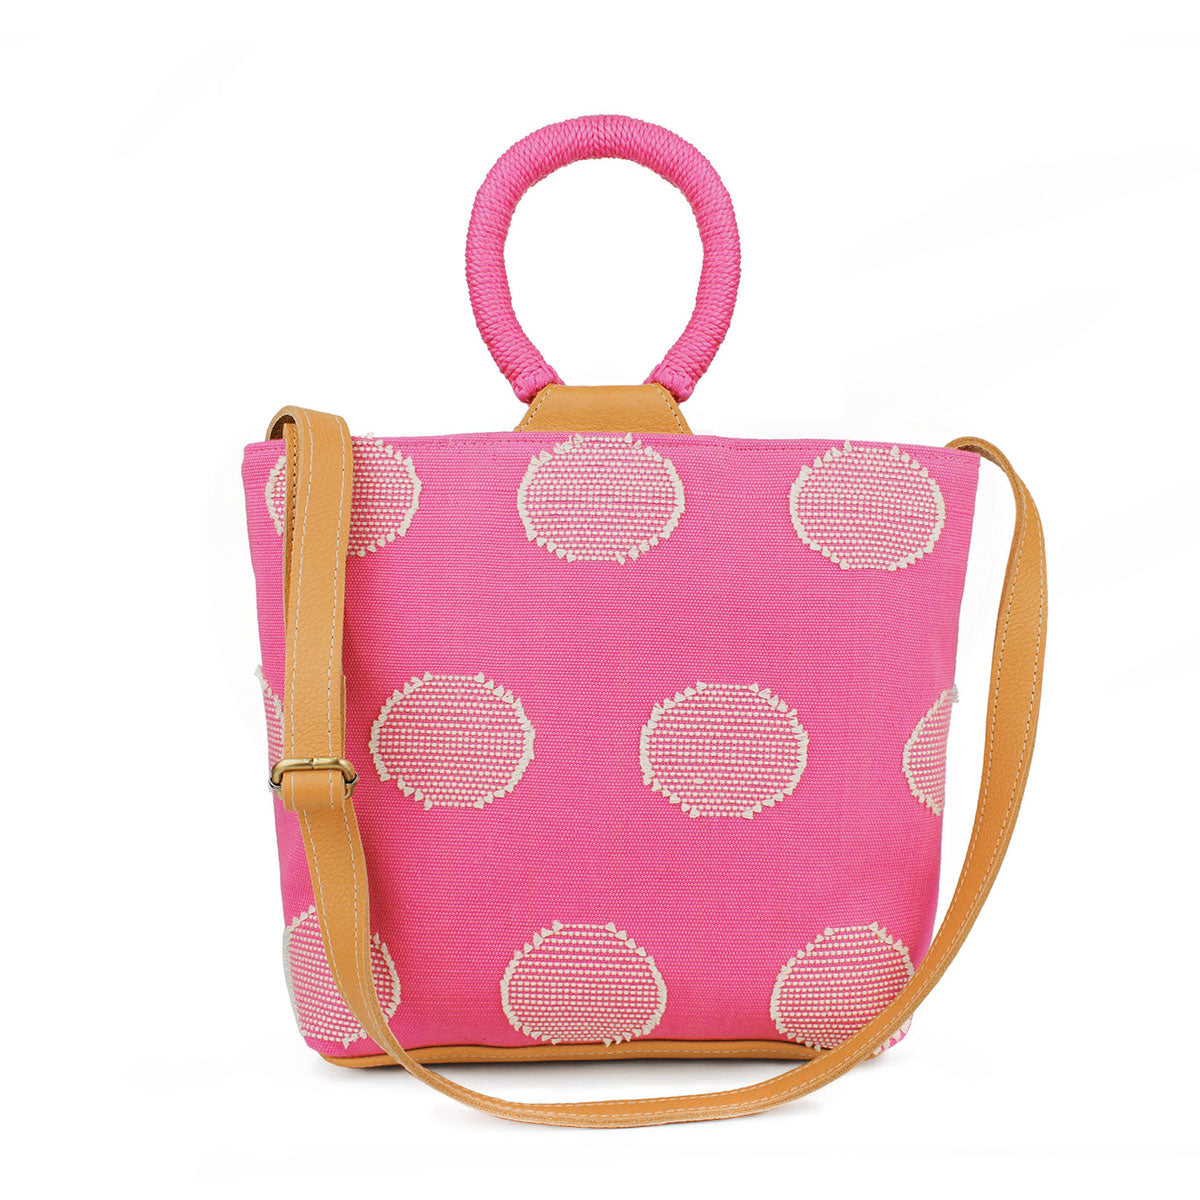 Artisan Dalila Handwoven Tote Sunset Pink. The tote has rounded handles coiled in pink thread. The Sunset Pink pattern has white circles over a pink background. It has an adjustable leather strap.